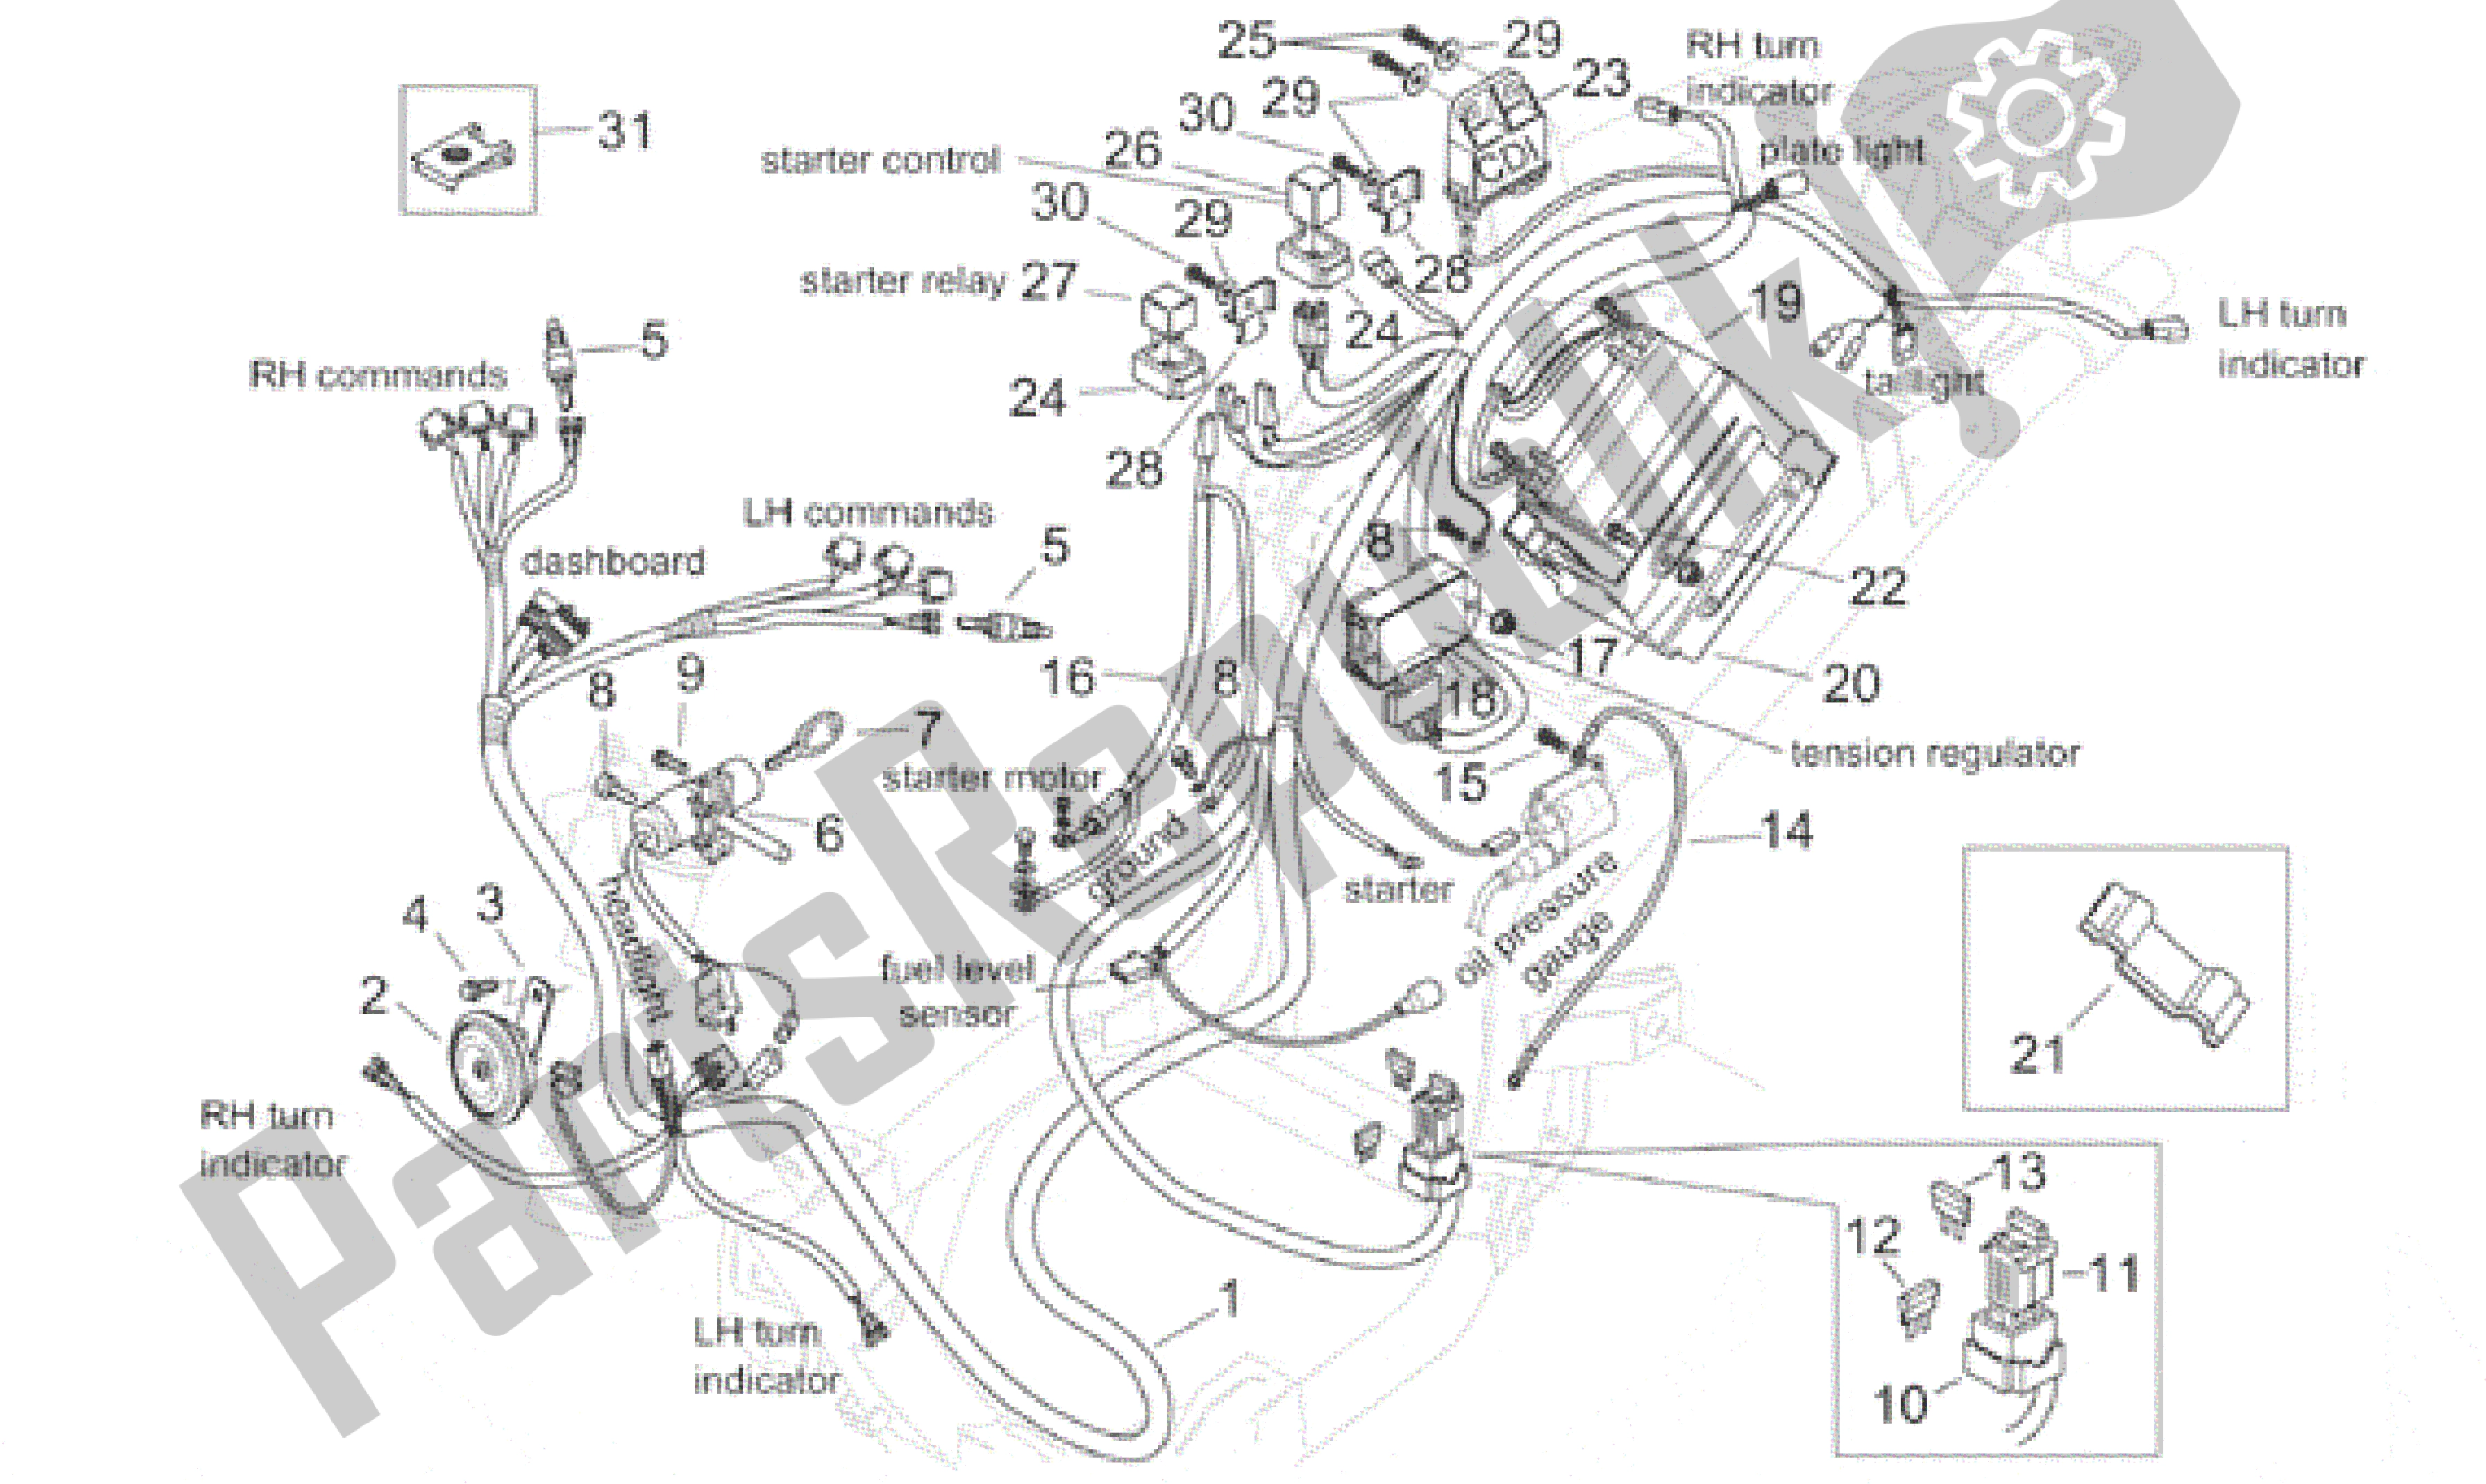 All parts for the Electrical System - Retro' of the Aprilia Habana 125 1999 - 2001